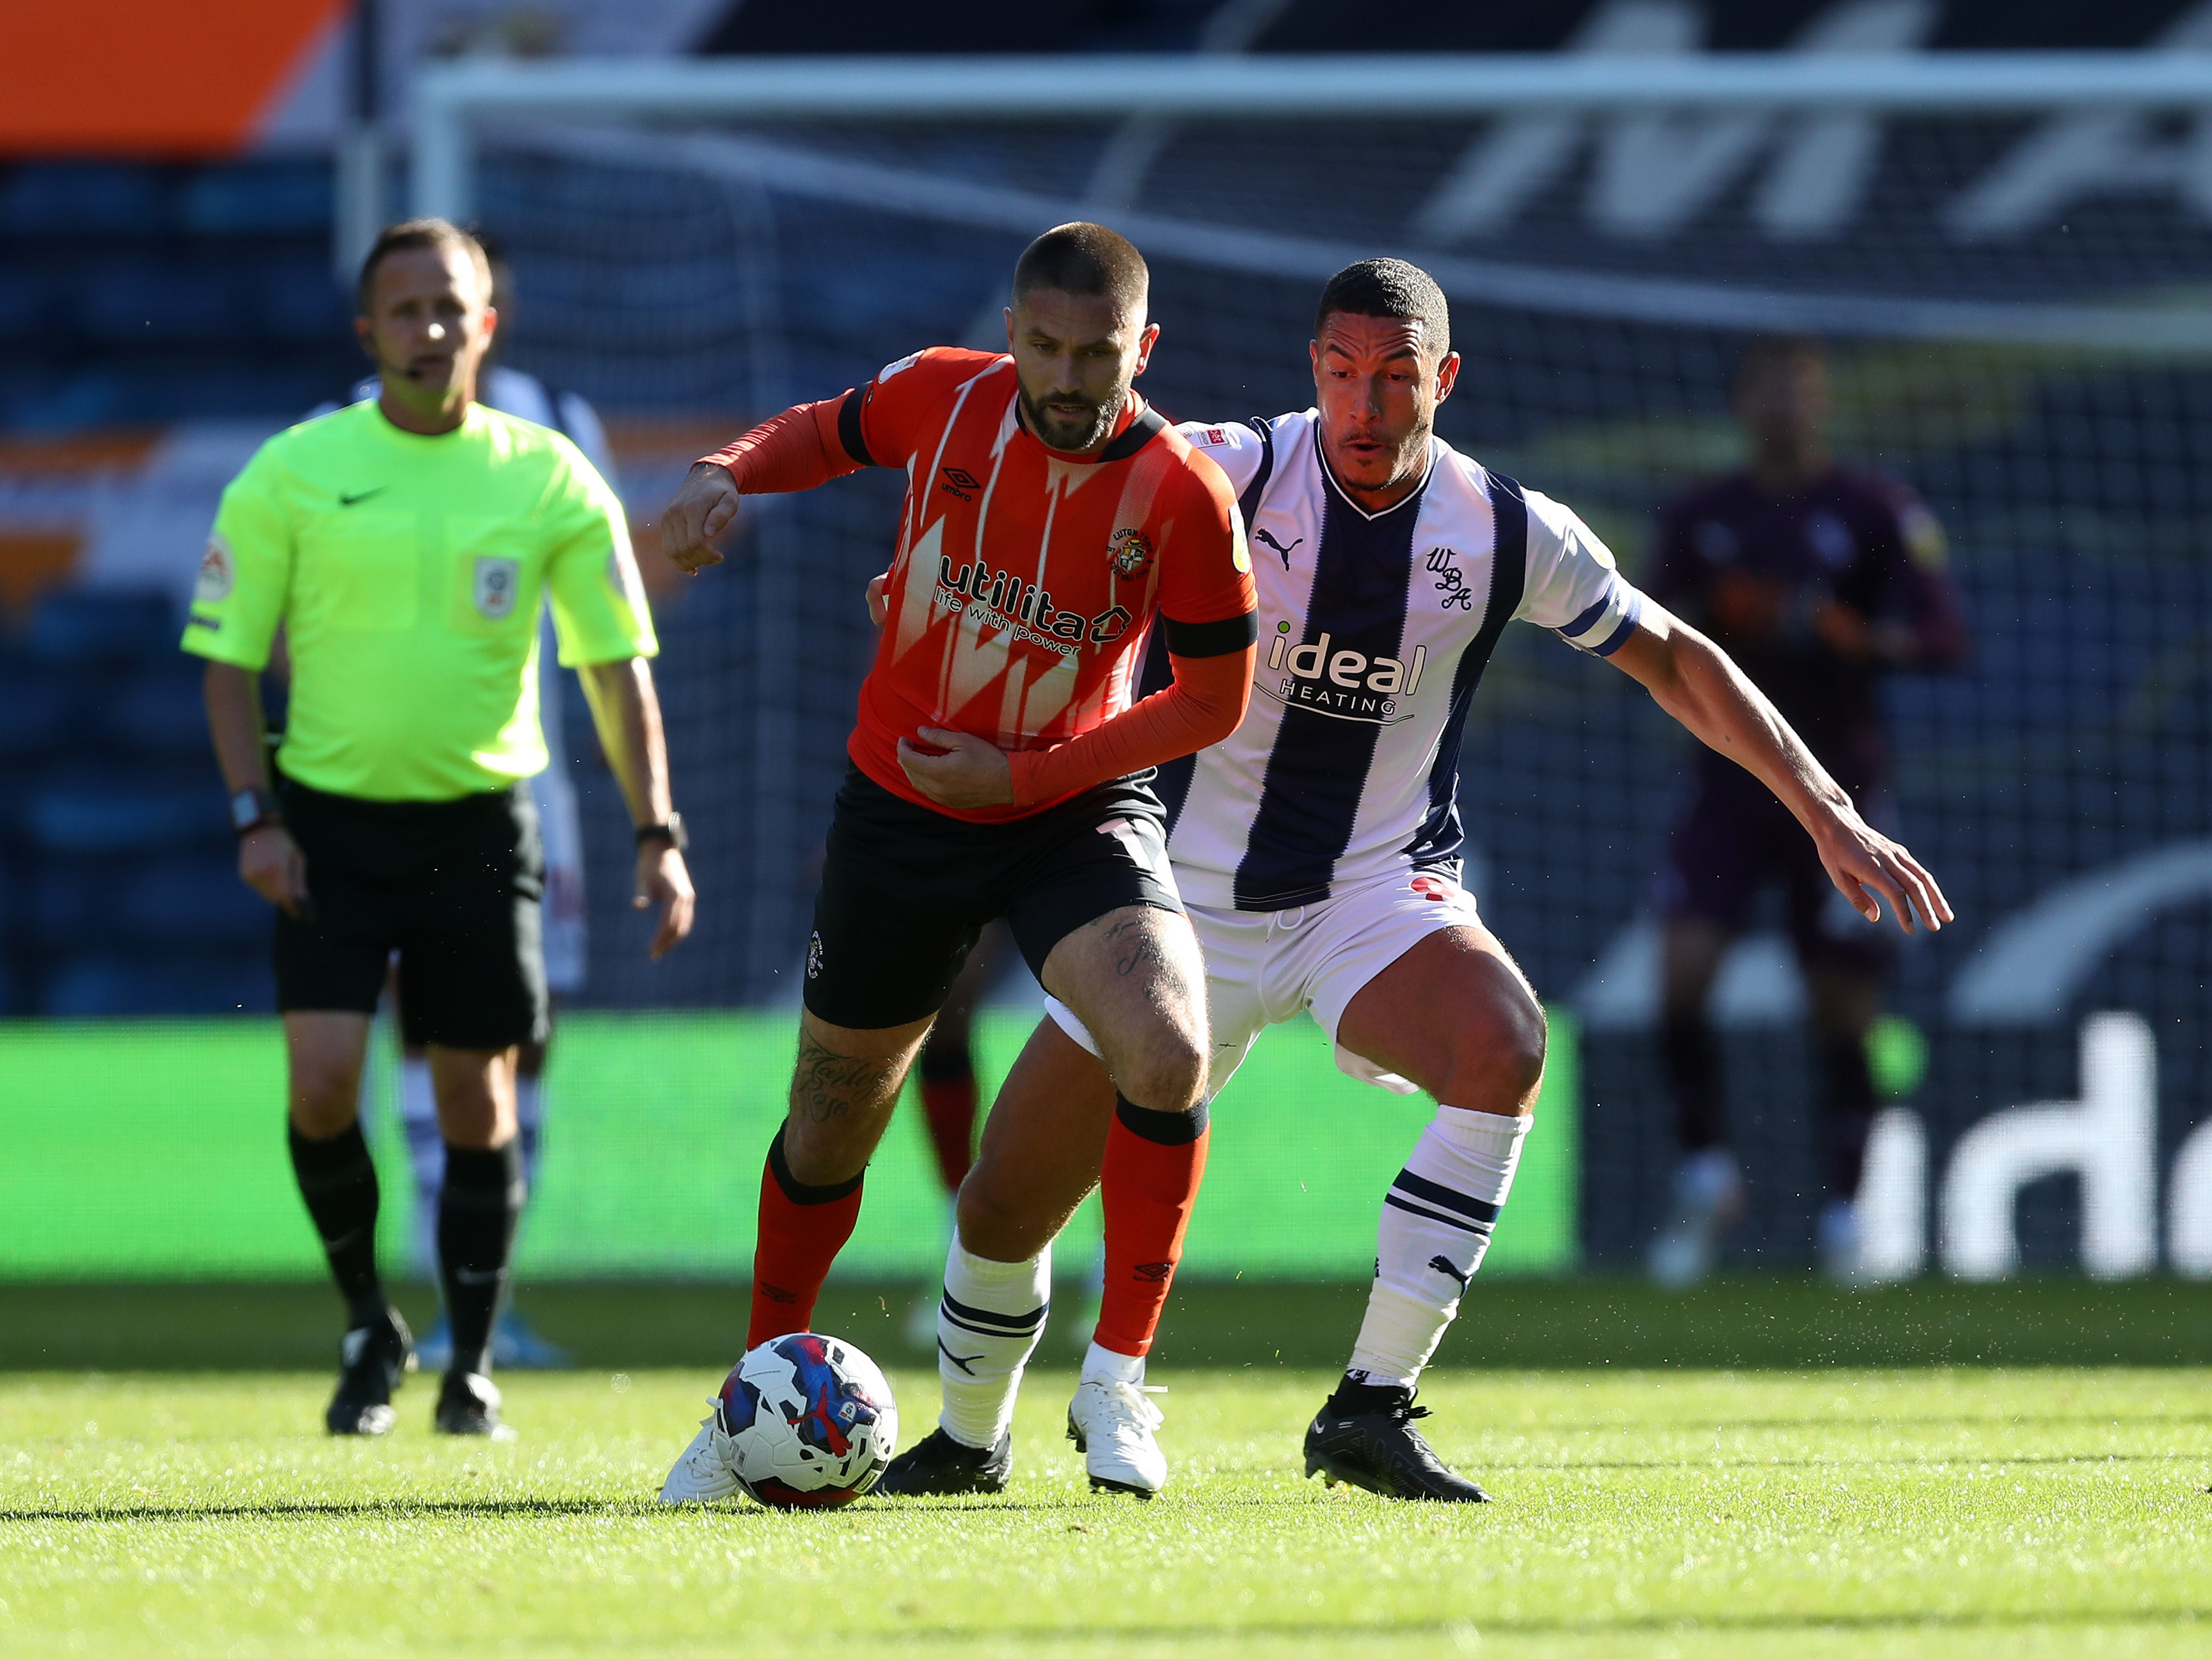 An image of Jake Livermore in action against Luton Town